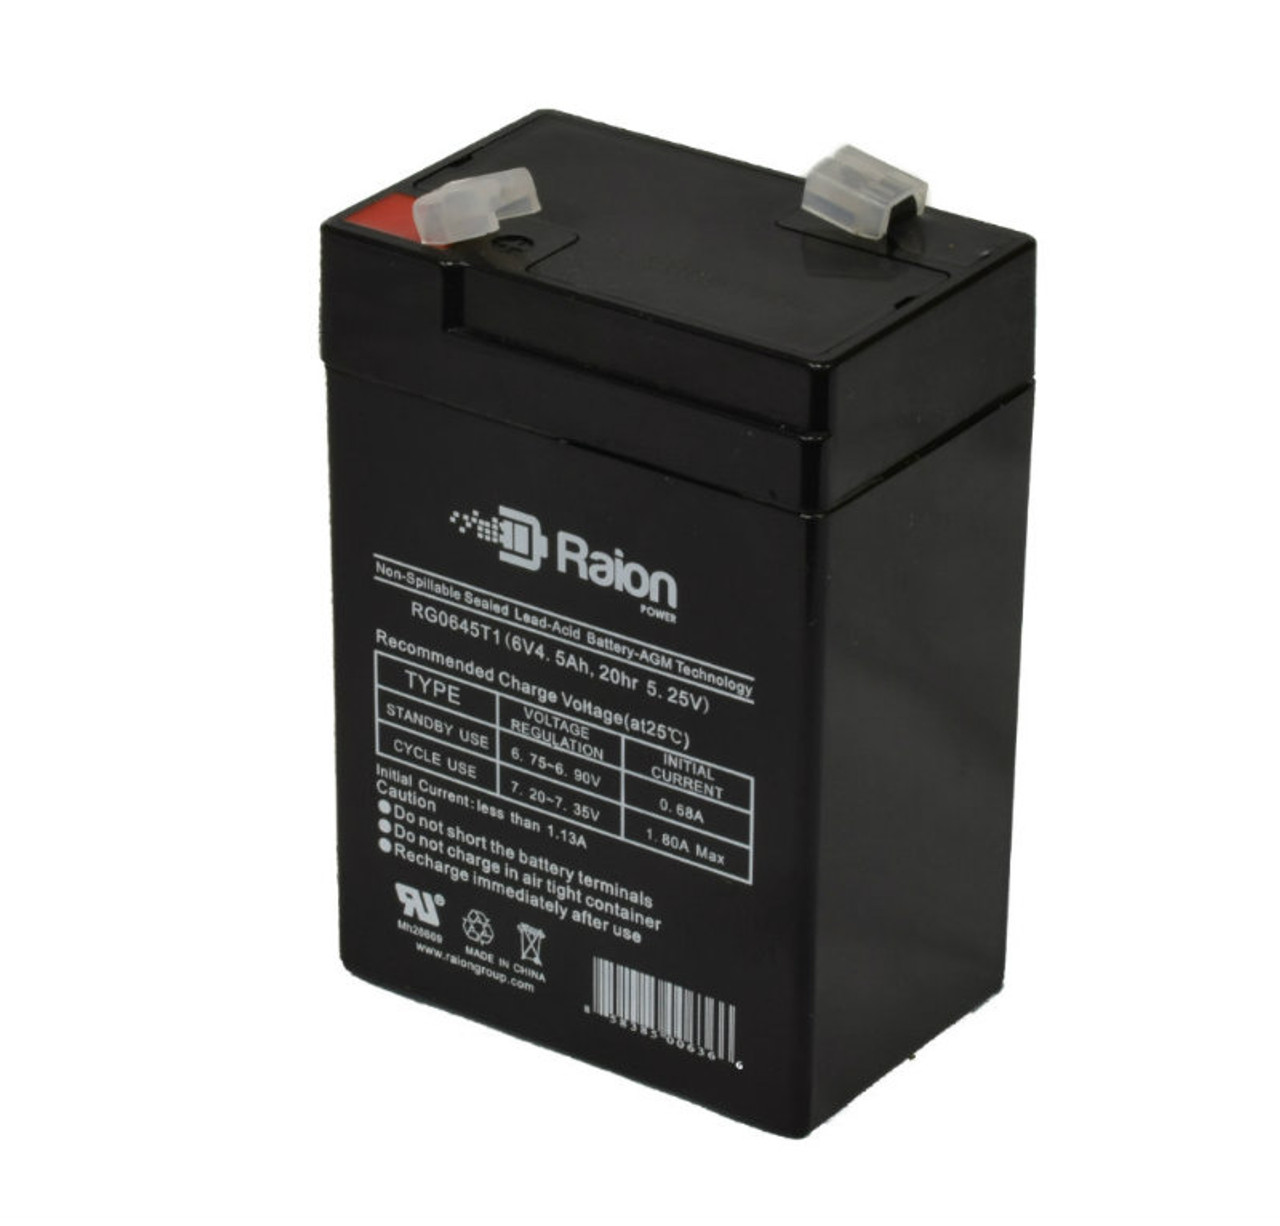 Raion Power RG0645T1 6V 4.5Ah Replacement Battery Cartridge for Light Alarms XE8